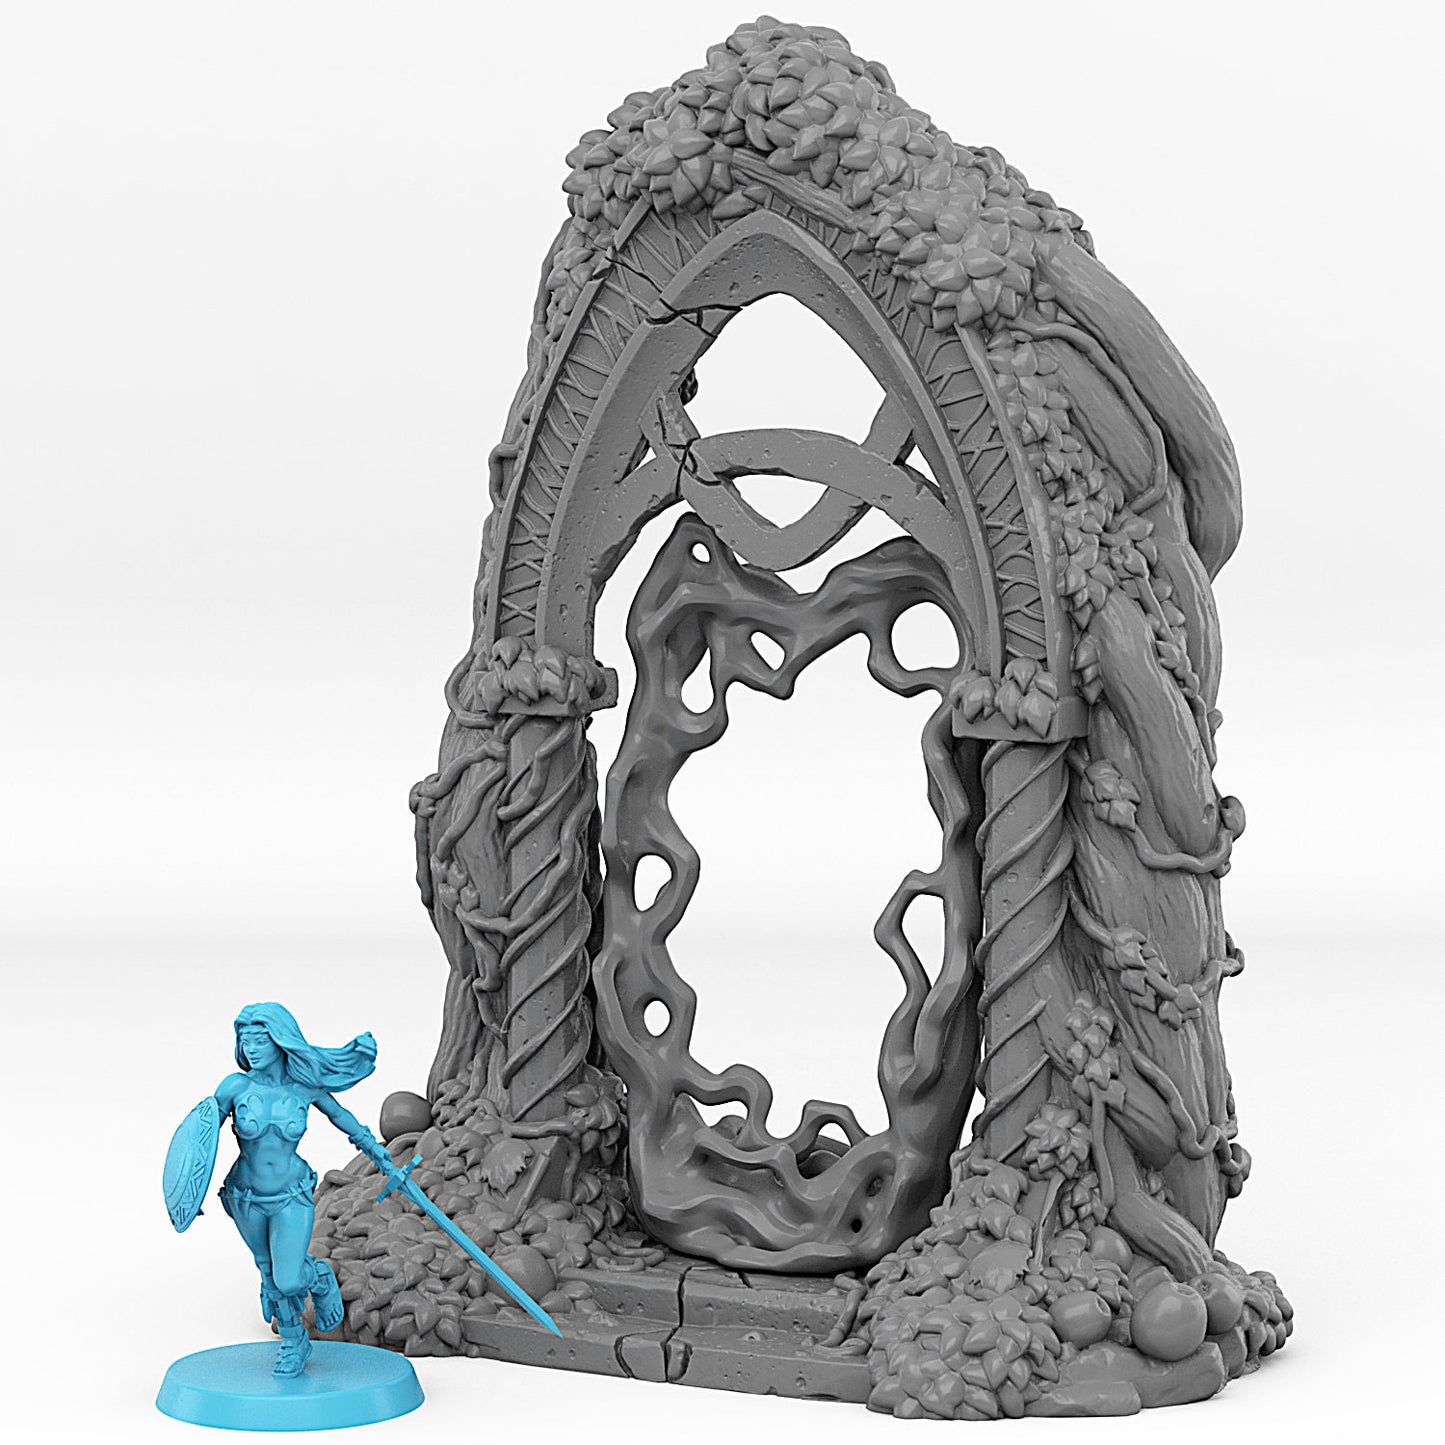 Elf Portal | Scenery and terrain | 3D Printed Resin Miniature | Tabletop Role Playing | AoS | D&D | 40K | Pathfinder